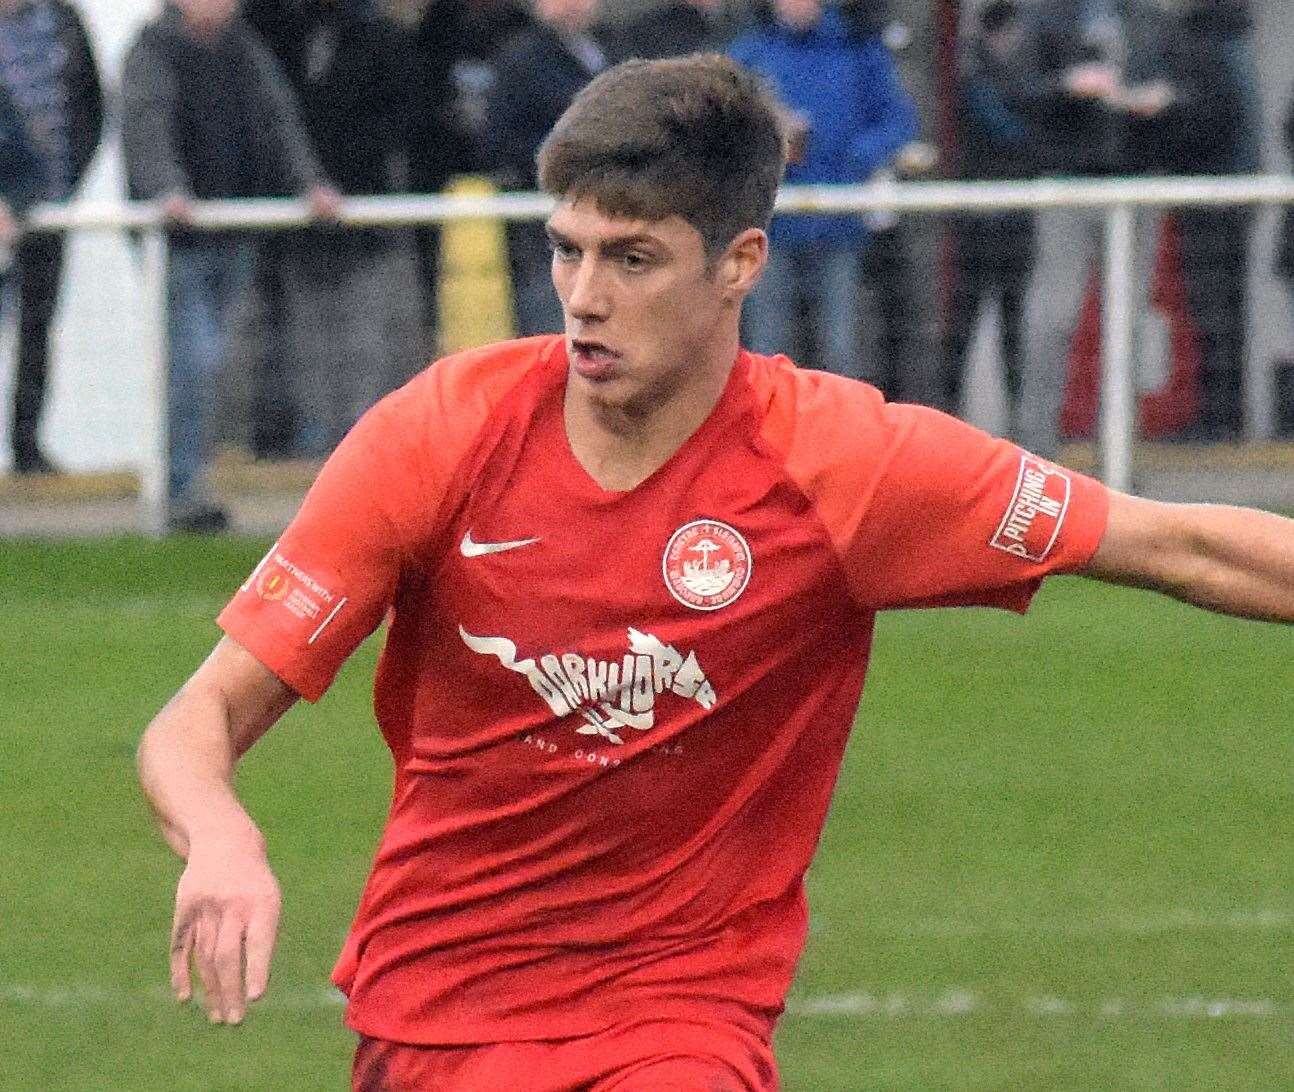 Luca Woodhouse has impressed Hythe player-boss James Rogers since arriving from Tonbridge Picture: Randolph File